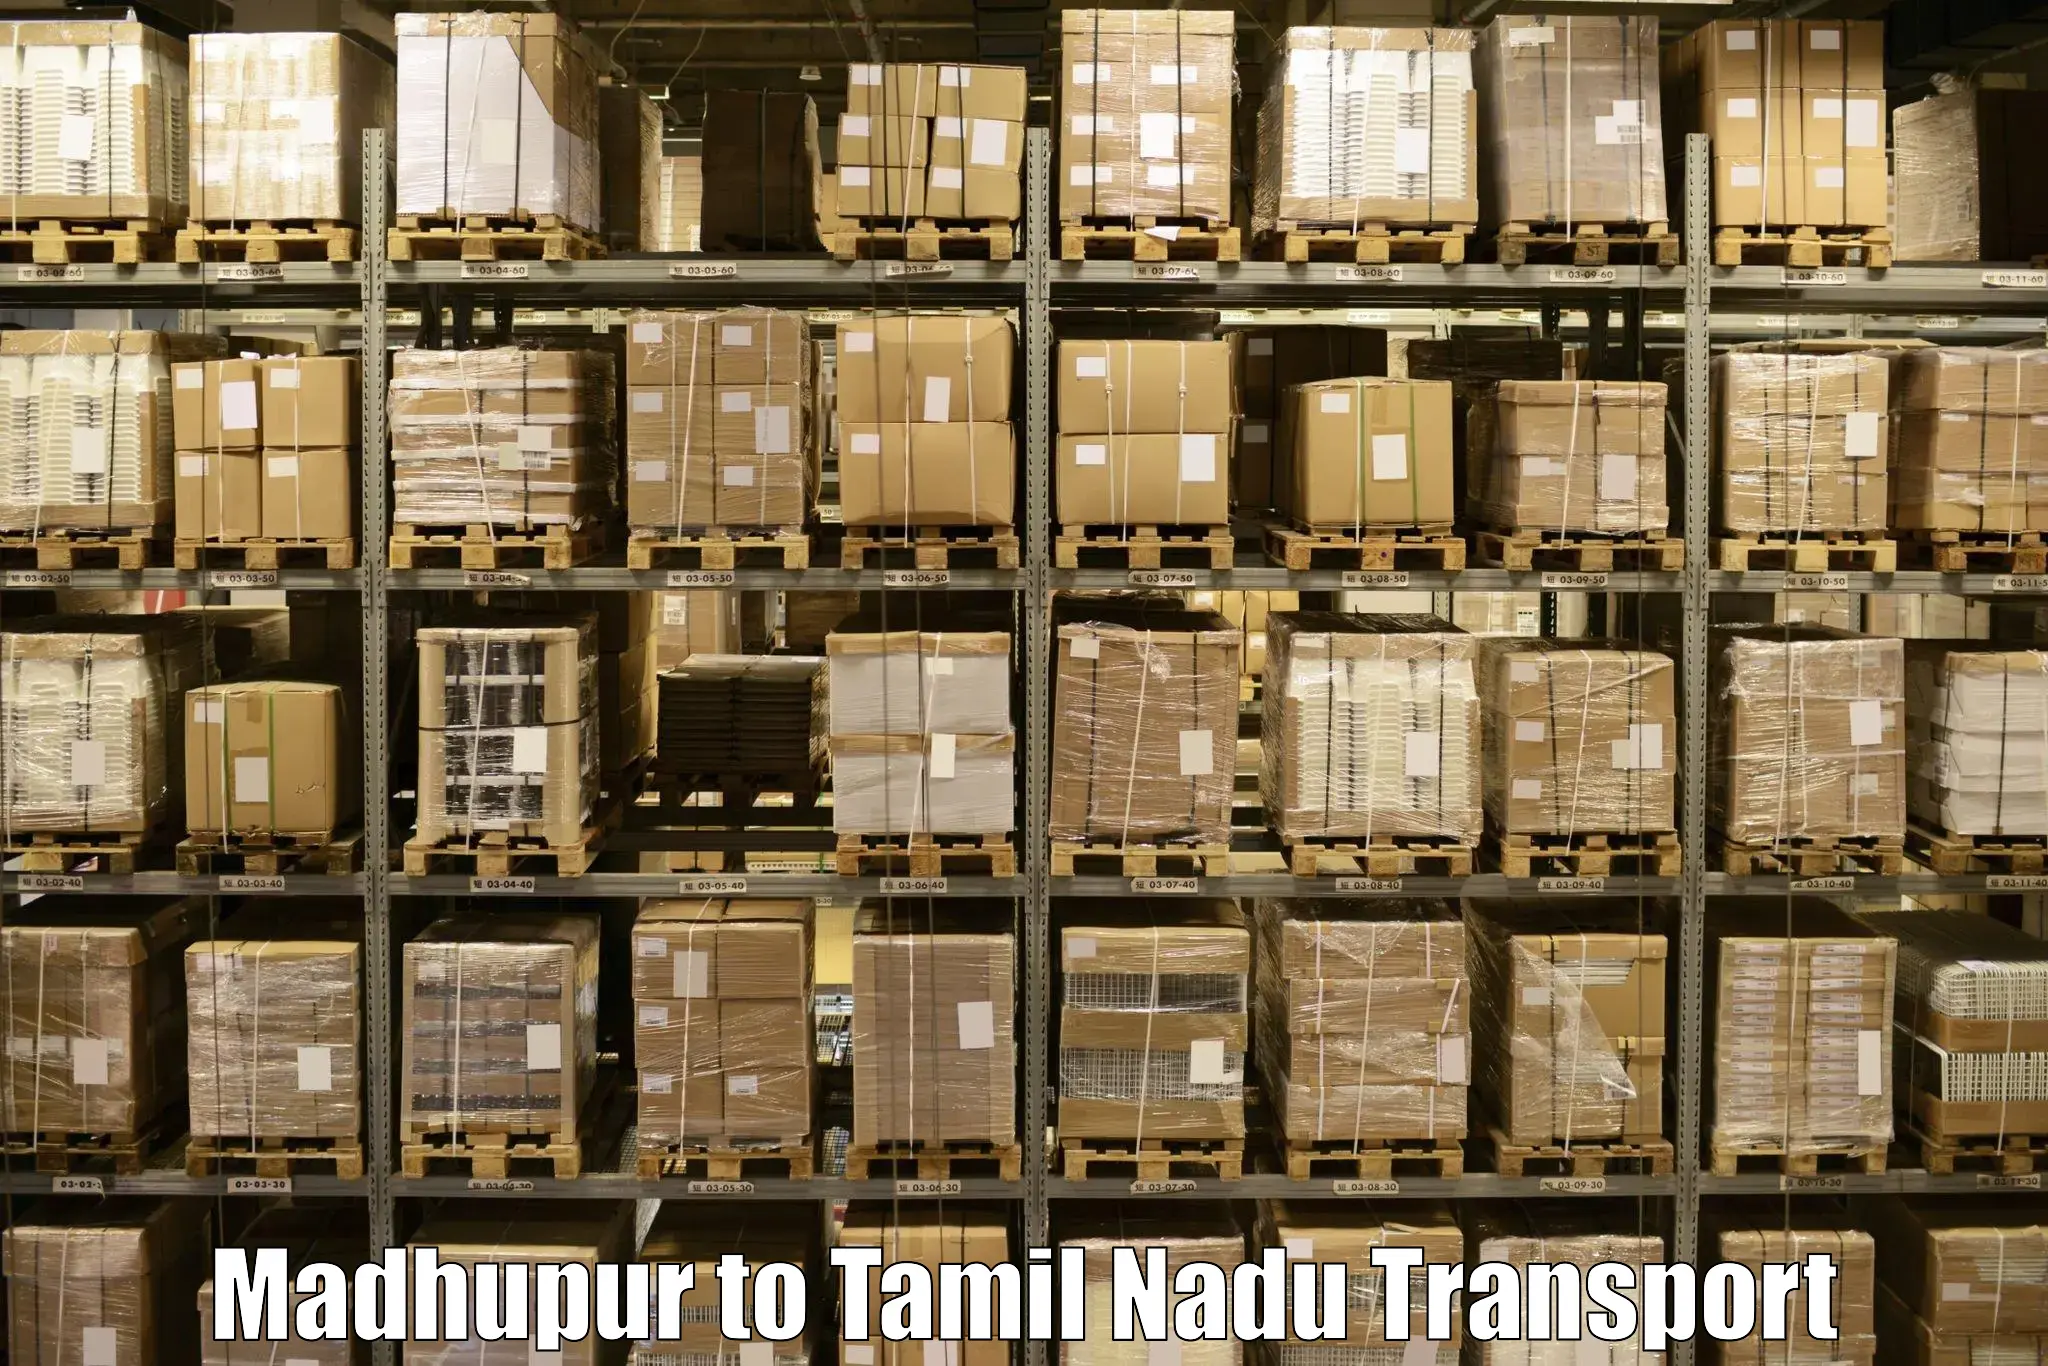 Air freight transport services in Madhupur to Muthukulathur